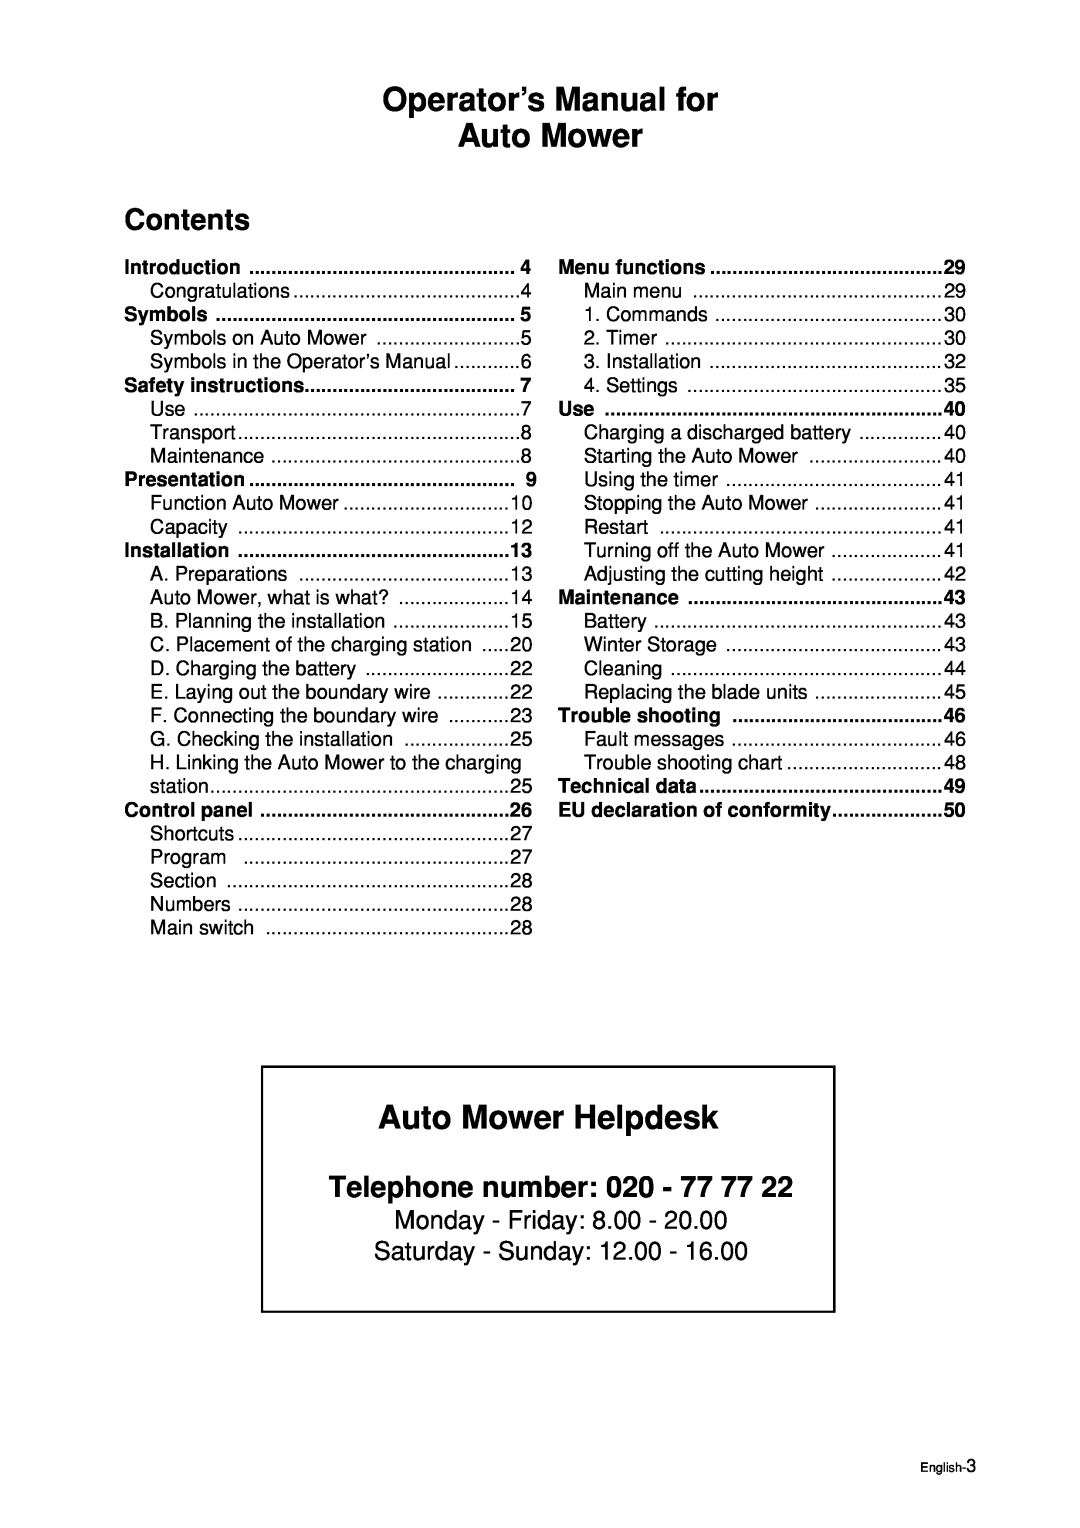 Husqvarna manual Operator’s Manual for Auto Mower, Auto Mower Helpdesk, Contents, Telephone number 020 